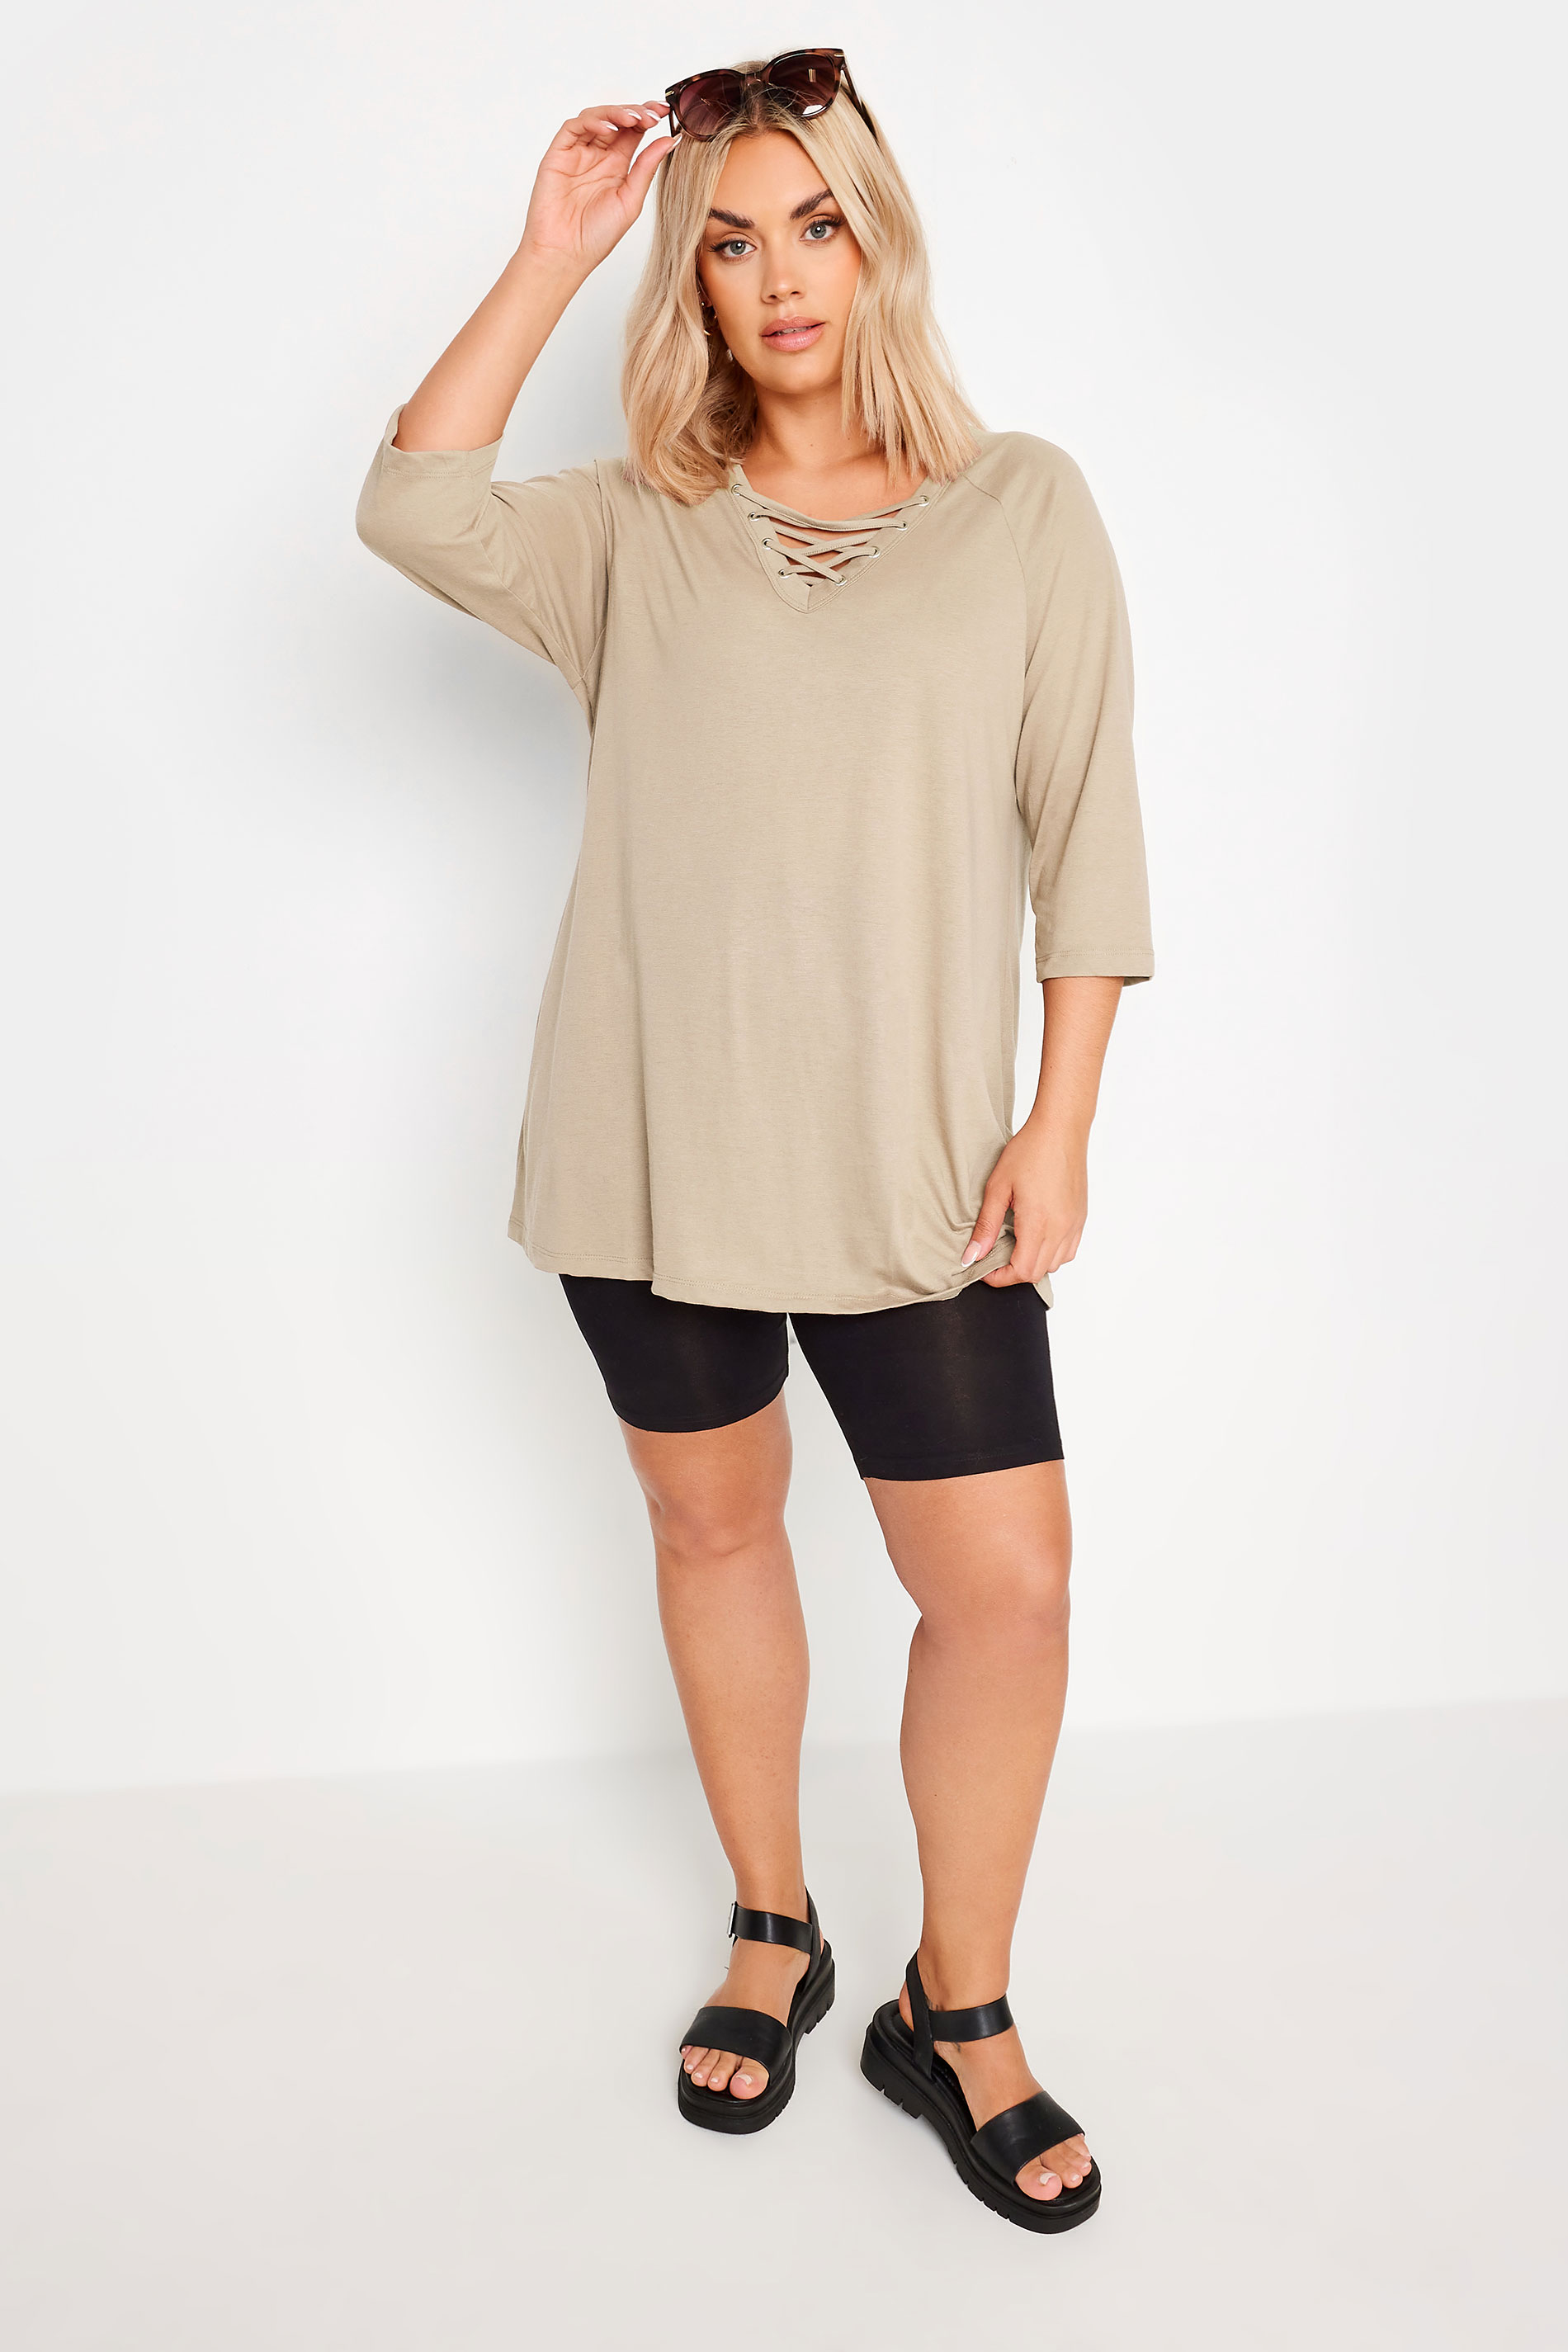 YOURS Plus Size Mocha Brown Lace Up Eyelet Top | Yours Clothing 2